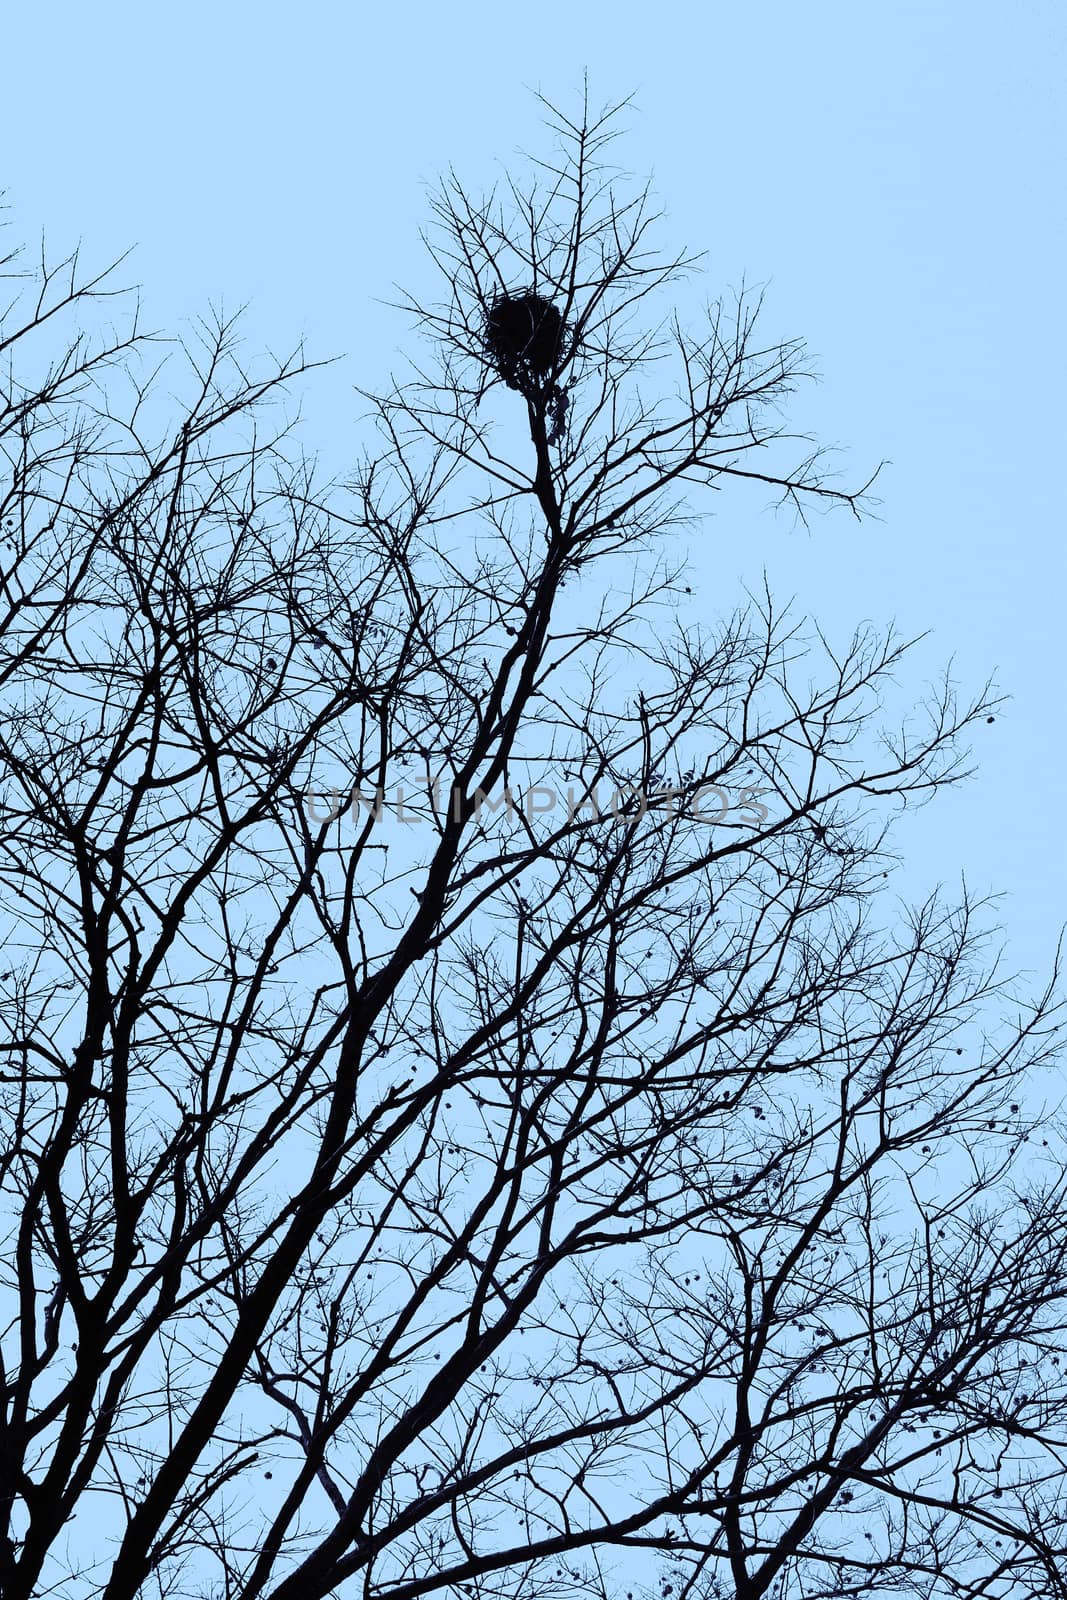 Nest in a tree under the sky